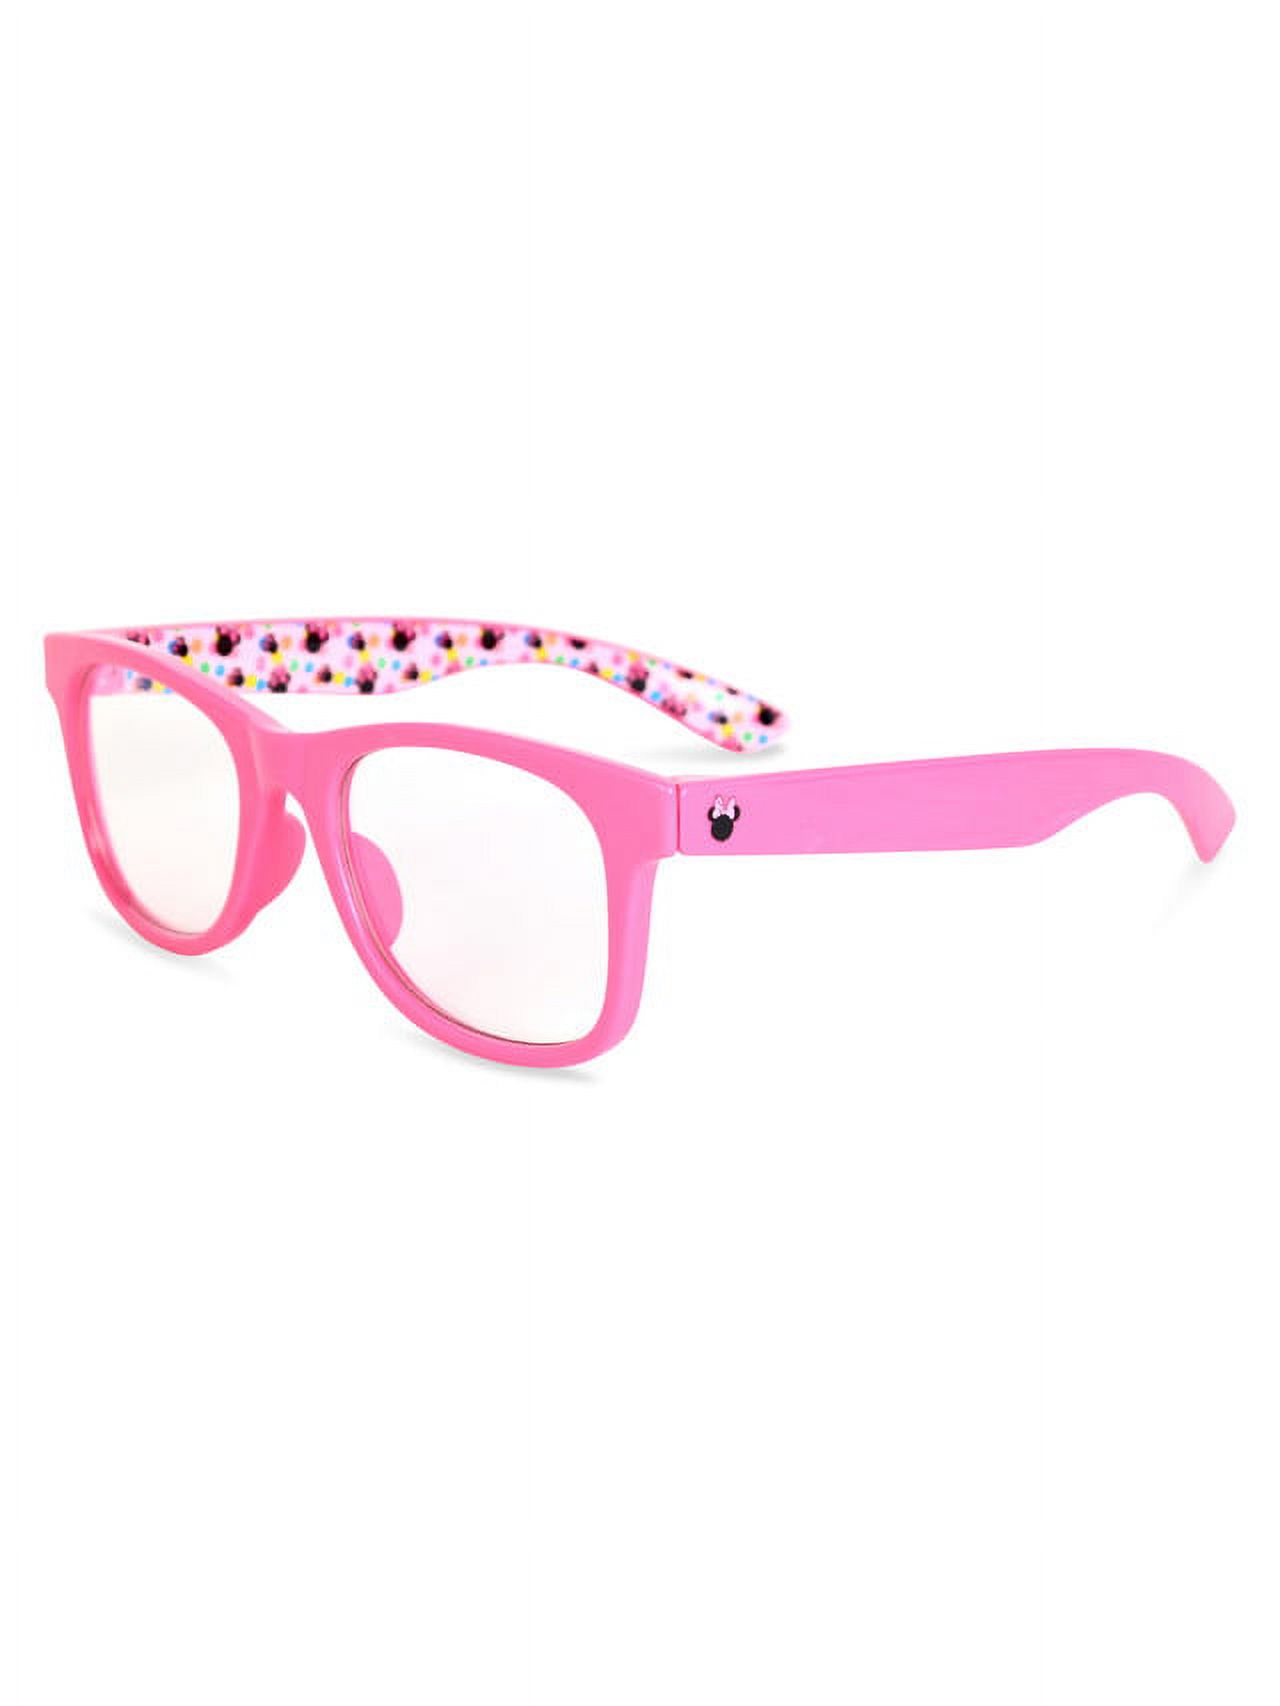 Minnie Mouse Blue Light Blocking Glasses for Boys with Zippered Case - image 5 of 5